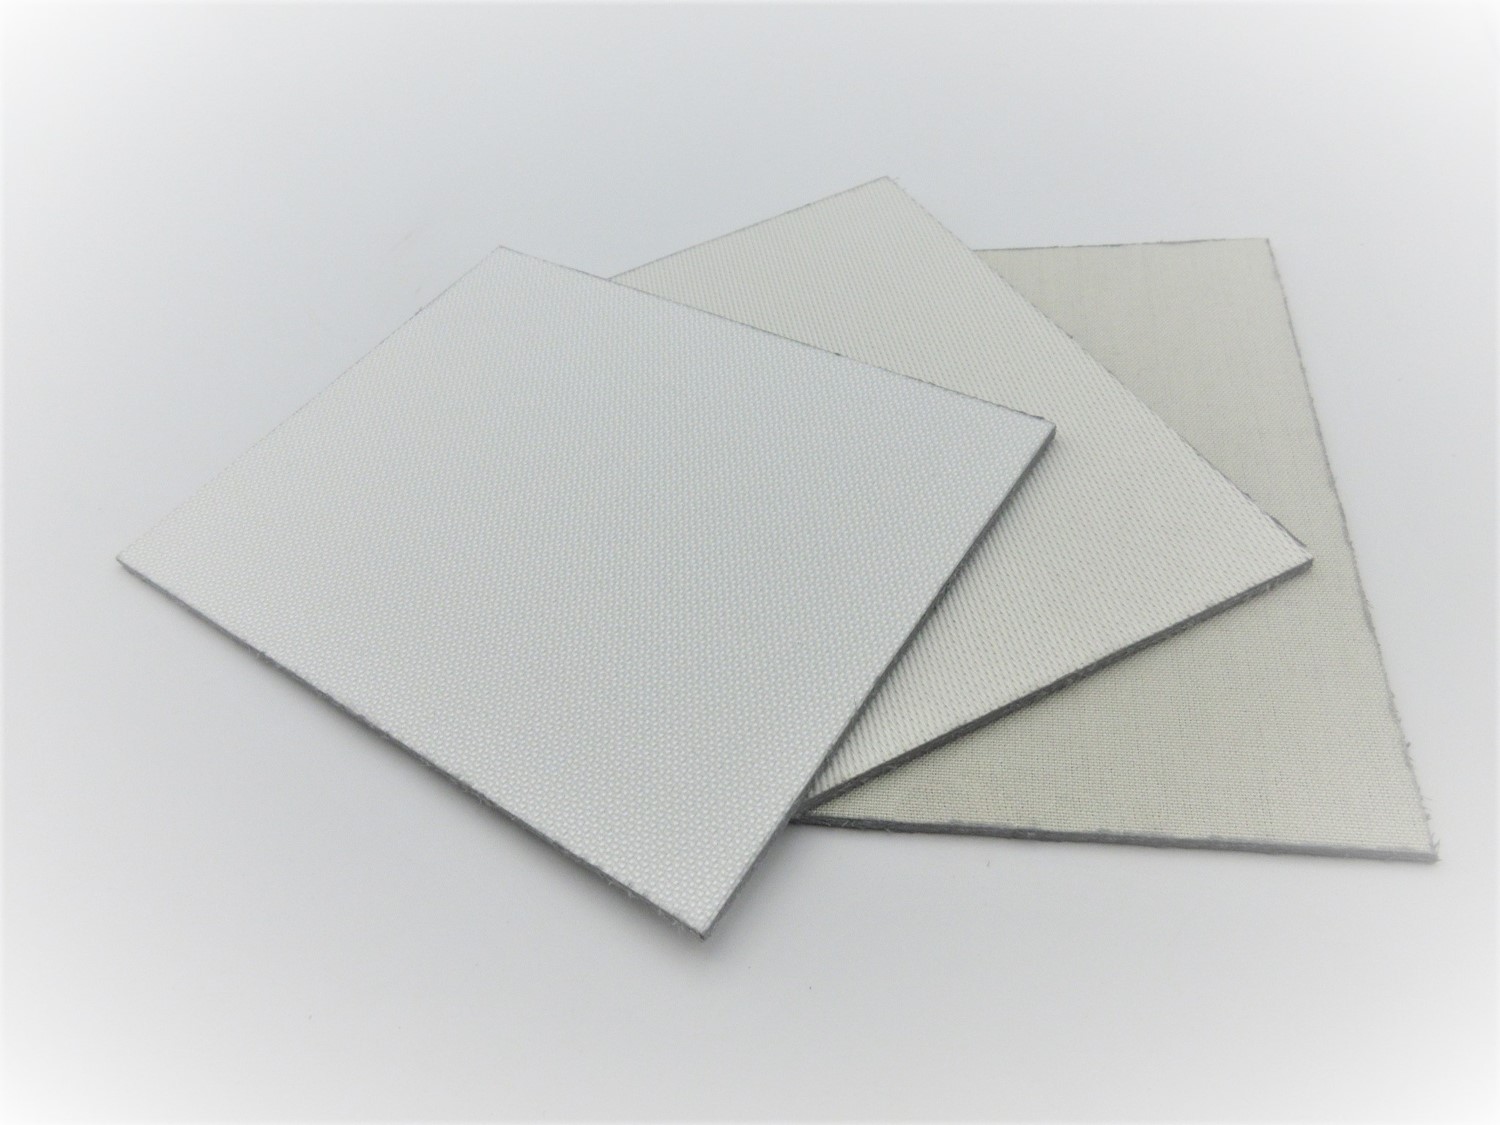 Sub-material for Heat Press Process (Cushioning Material)